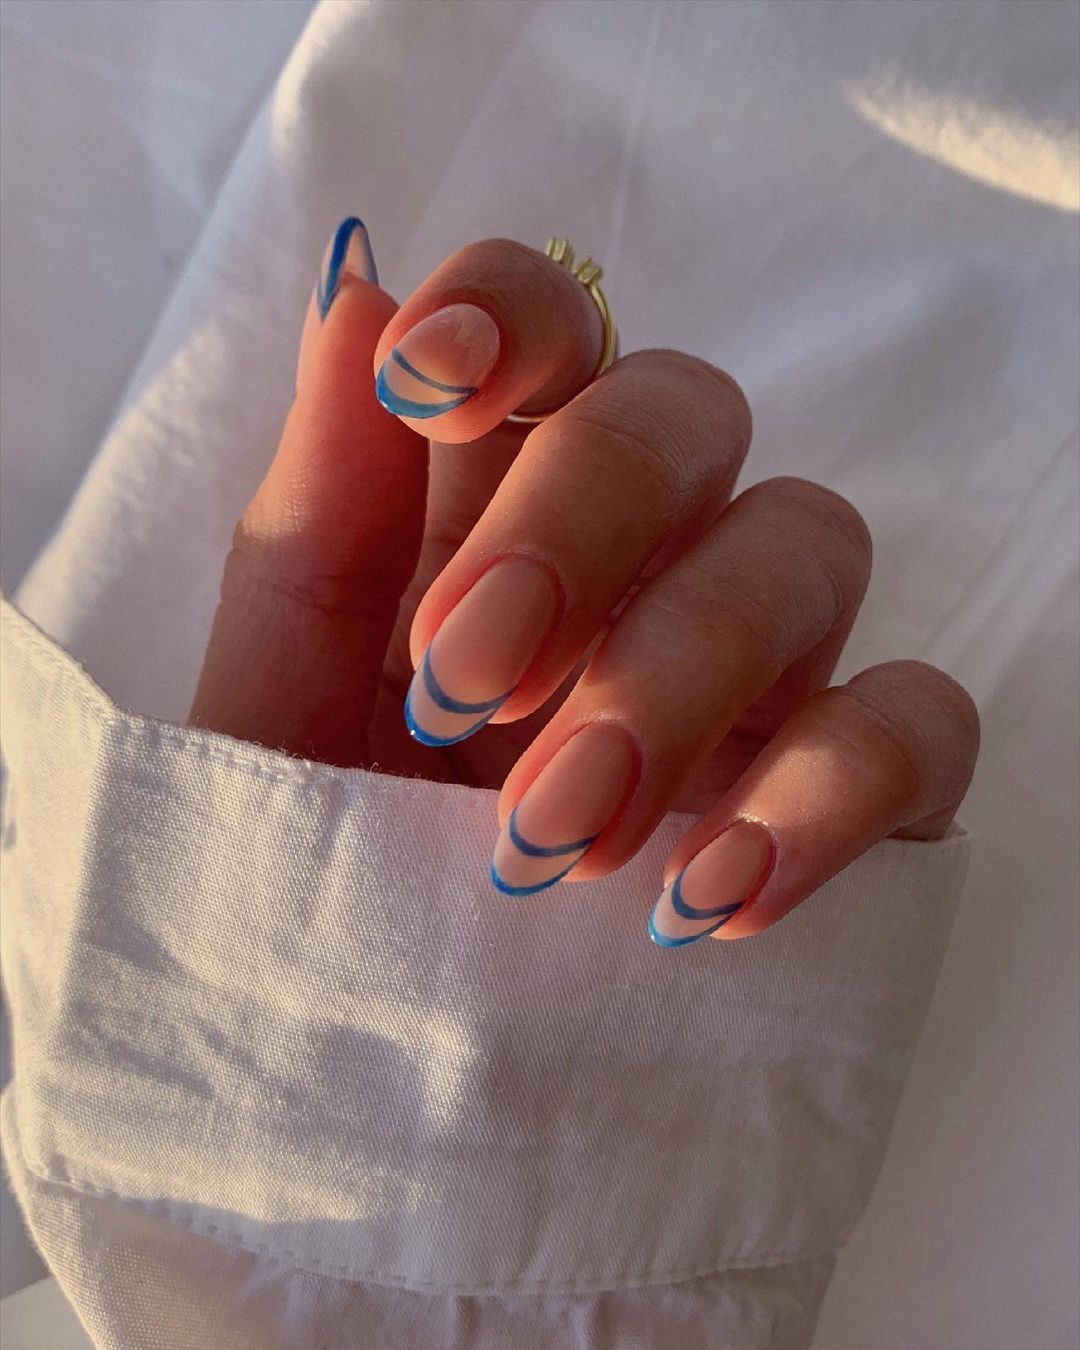 The Outline French Manicure Is The Latest Nail Trend To Try - Grazia